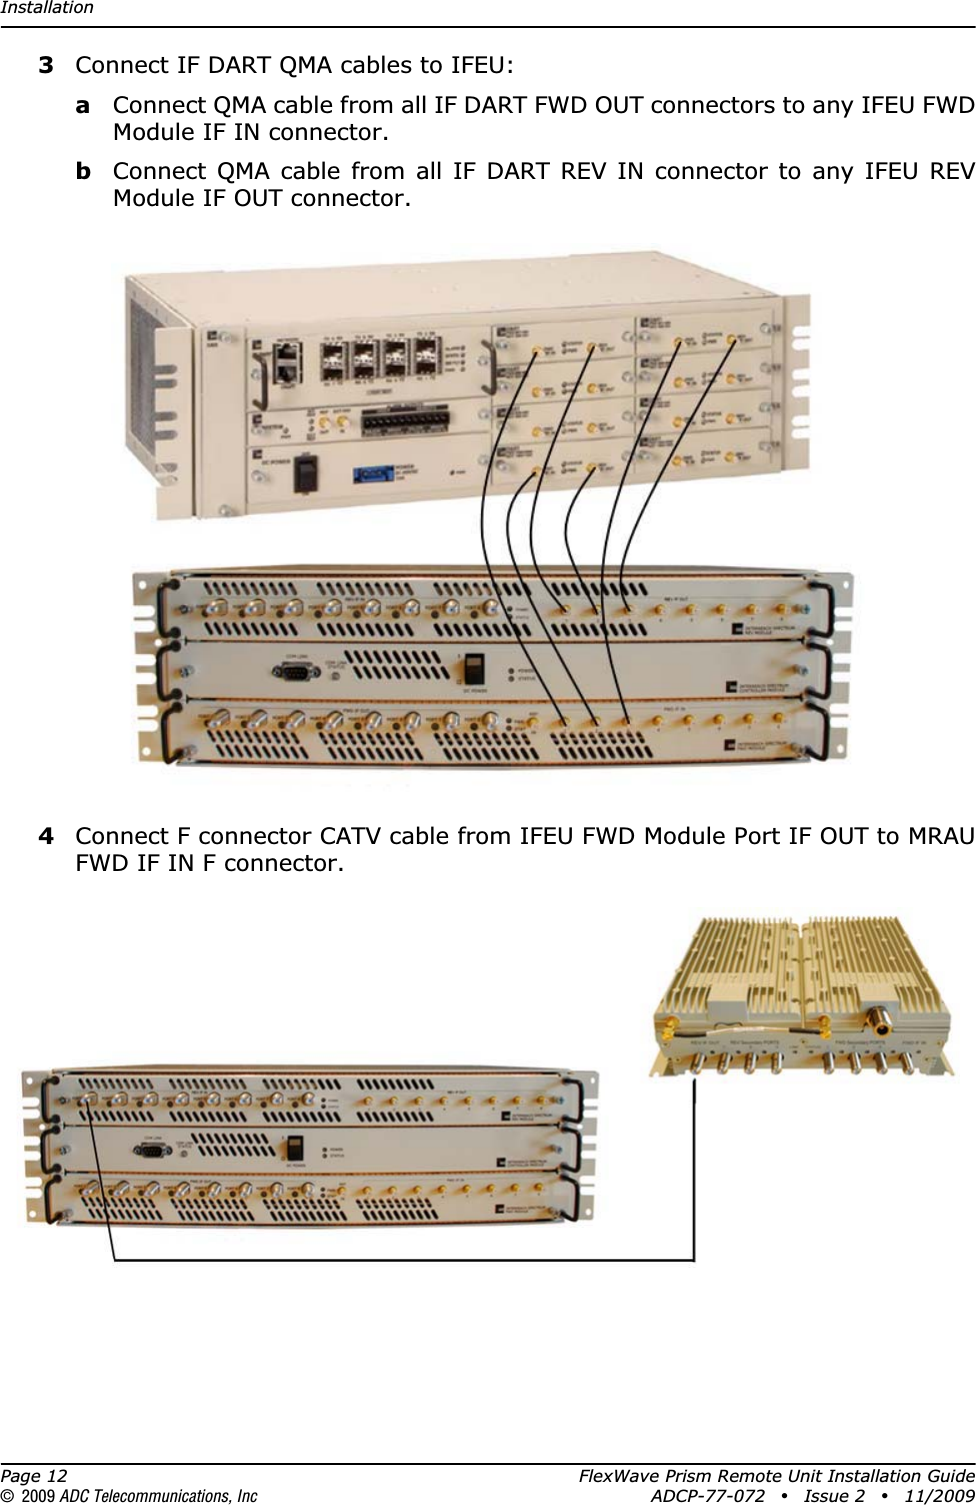 InstallationPage 12 FlexWave Prism Remote Unit Installation Guide© 2009 ADC Telecommunications, Inc ADCP-77-072 • Issue 2 • 11/20093Connect IF DART QMA cables to IFEU:aConnect QMA cable from all IF DART FWD OUT connectors to any IFEU FWD Module IF IN connector.bConnect QMA cable from all IF DART REV IN connector to any IFEU REV Module IF OUT connector.4Connect F connector CATV cable from IFEU FWD Module Port IF OUT to MRAU FWD IF IN F connector.